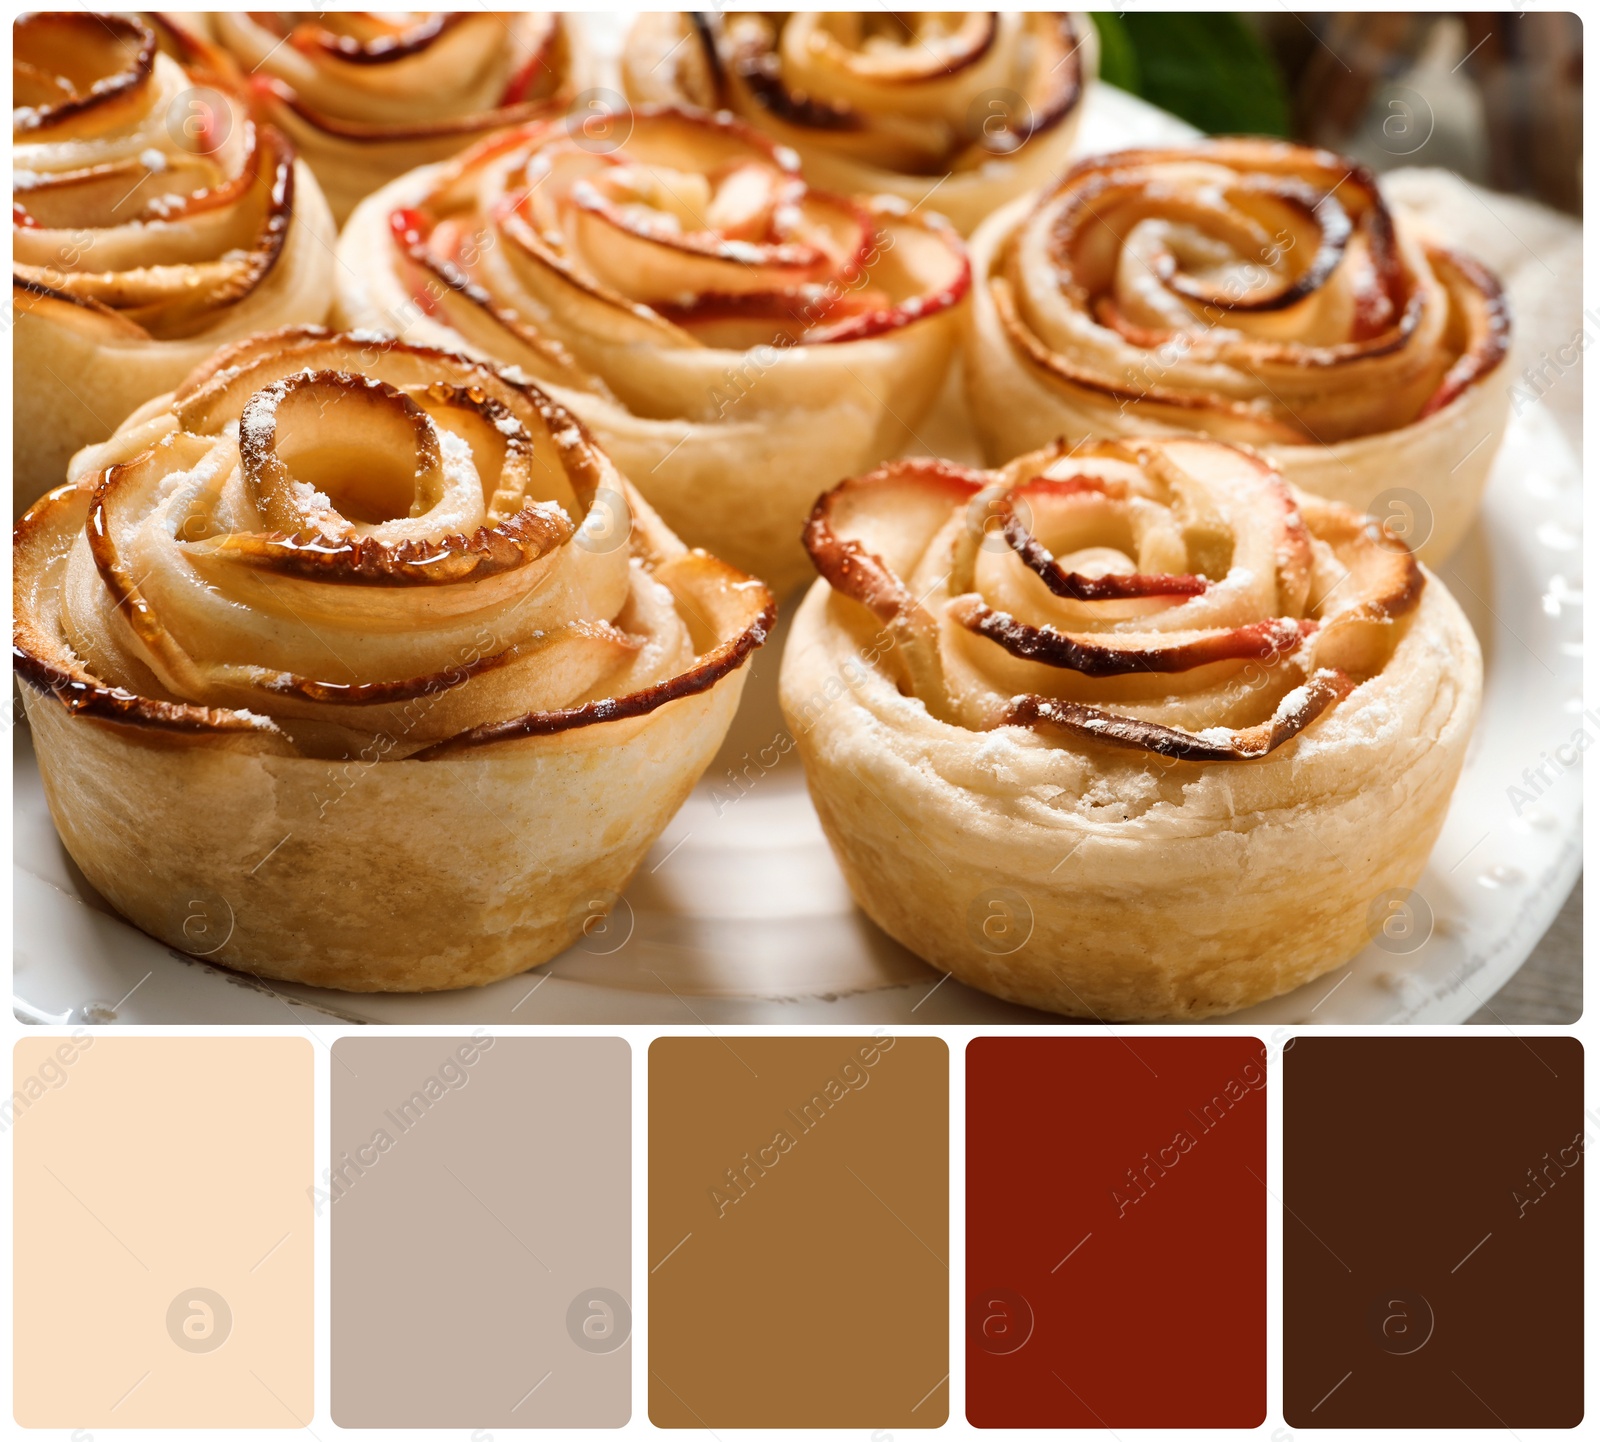 Image of Freshly baked apple roses on plate and color palette. Collage